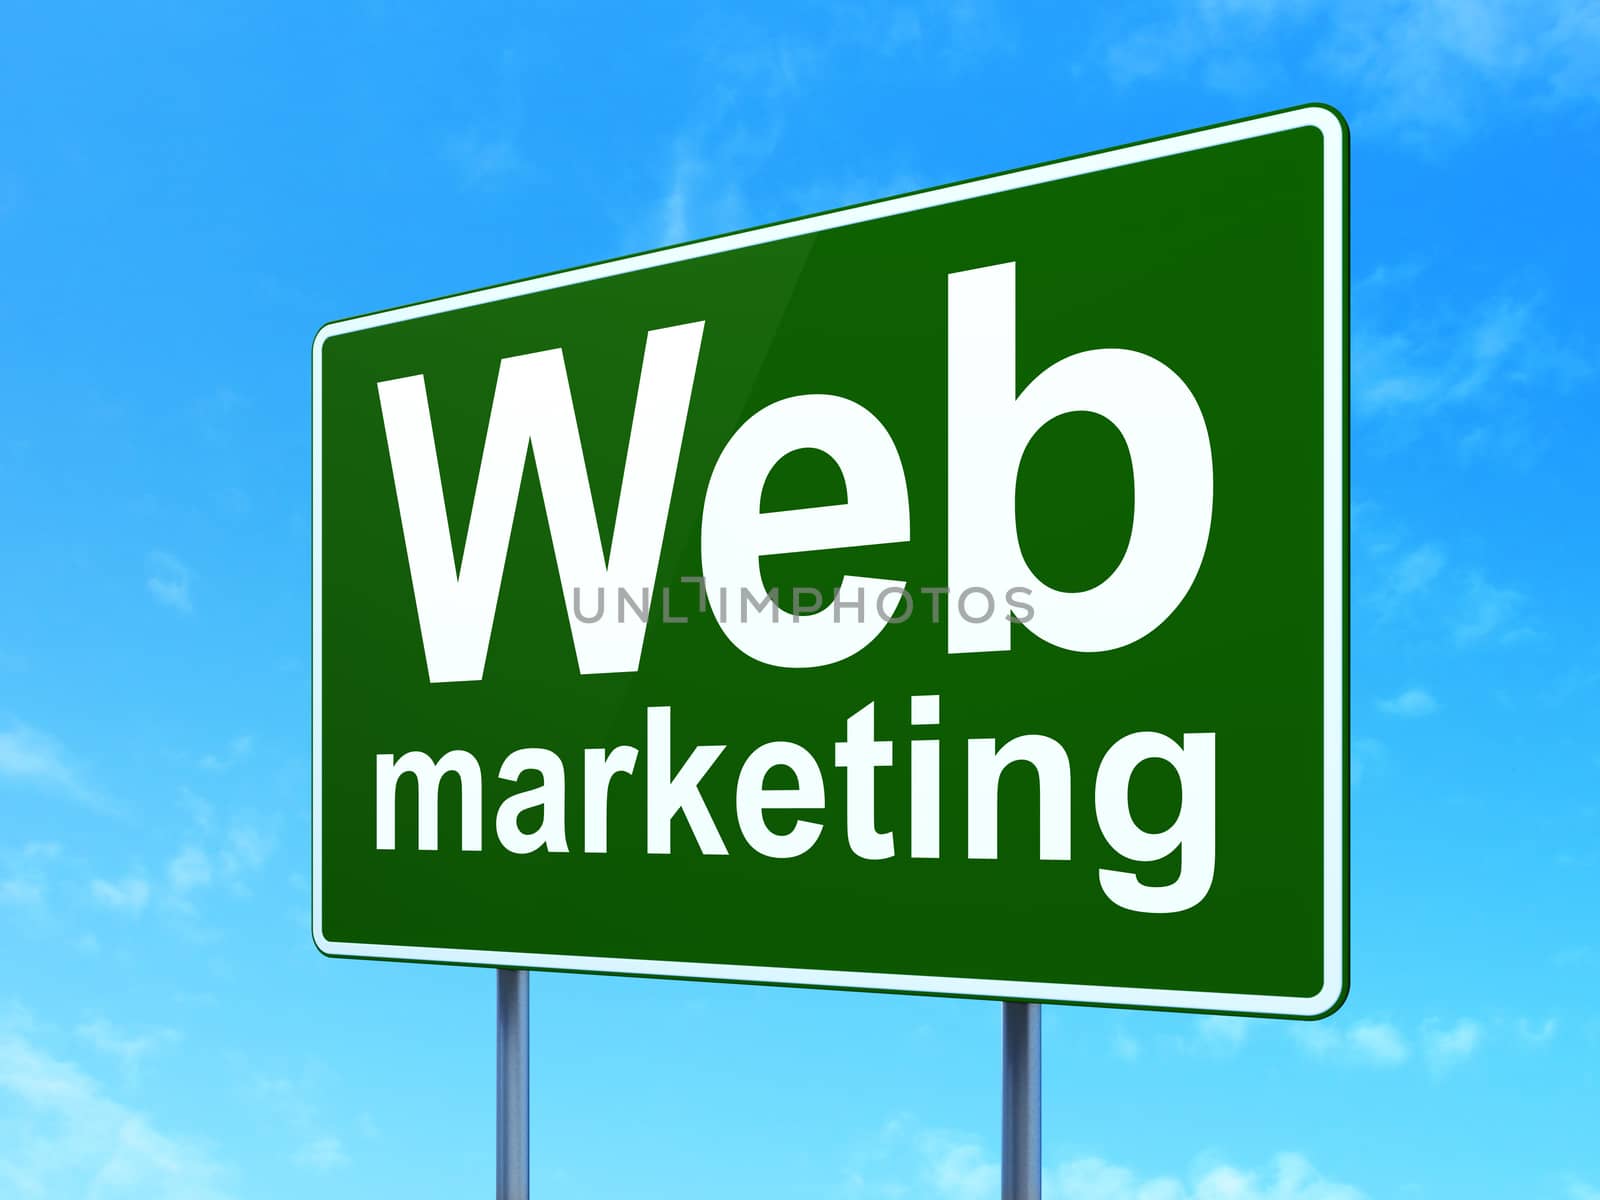 Web development concept: Web Marketing on green road highway sign, clear blue sky background, 3D rendering